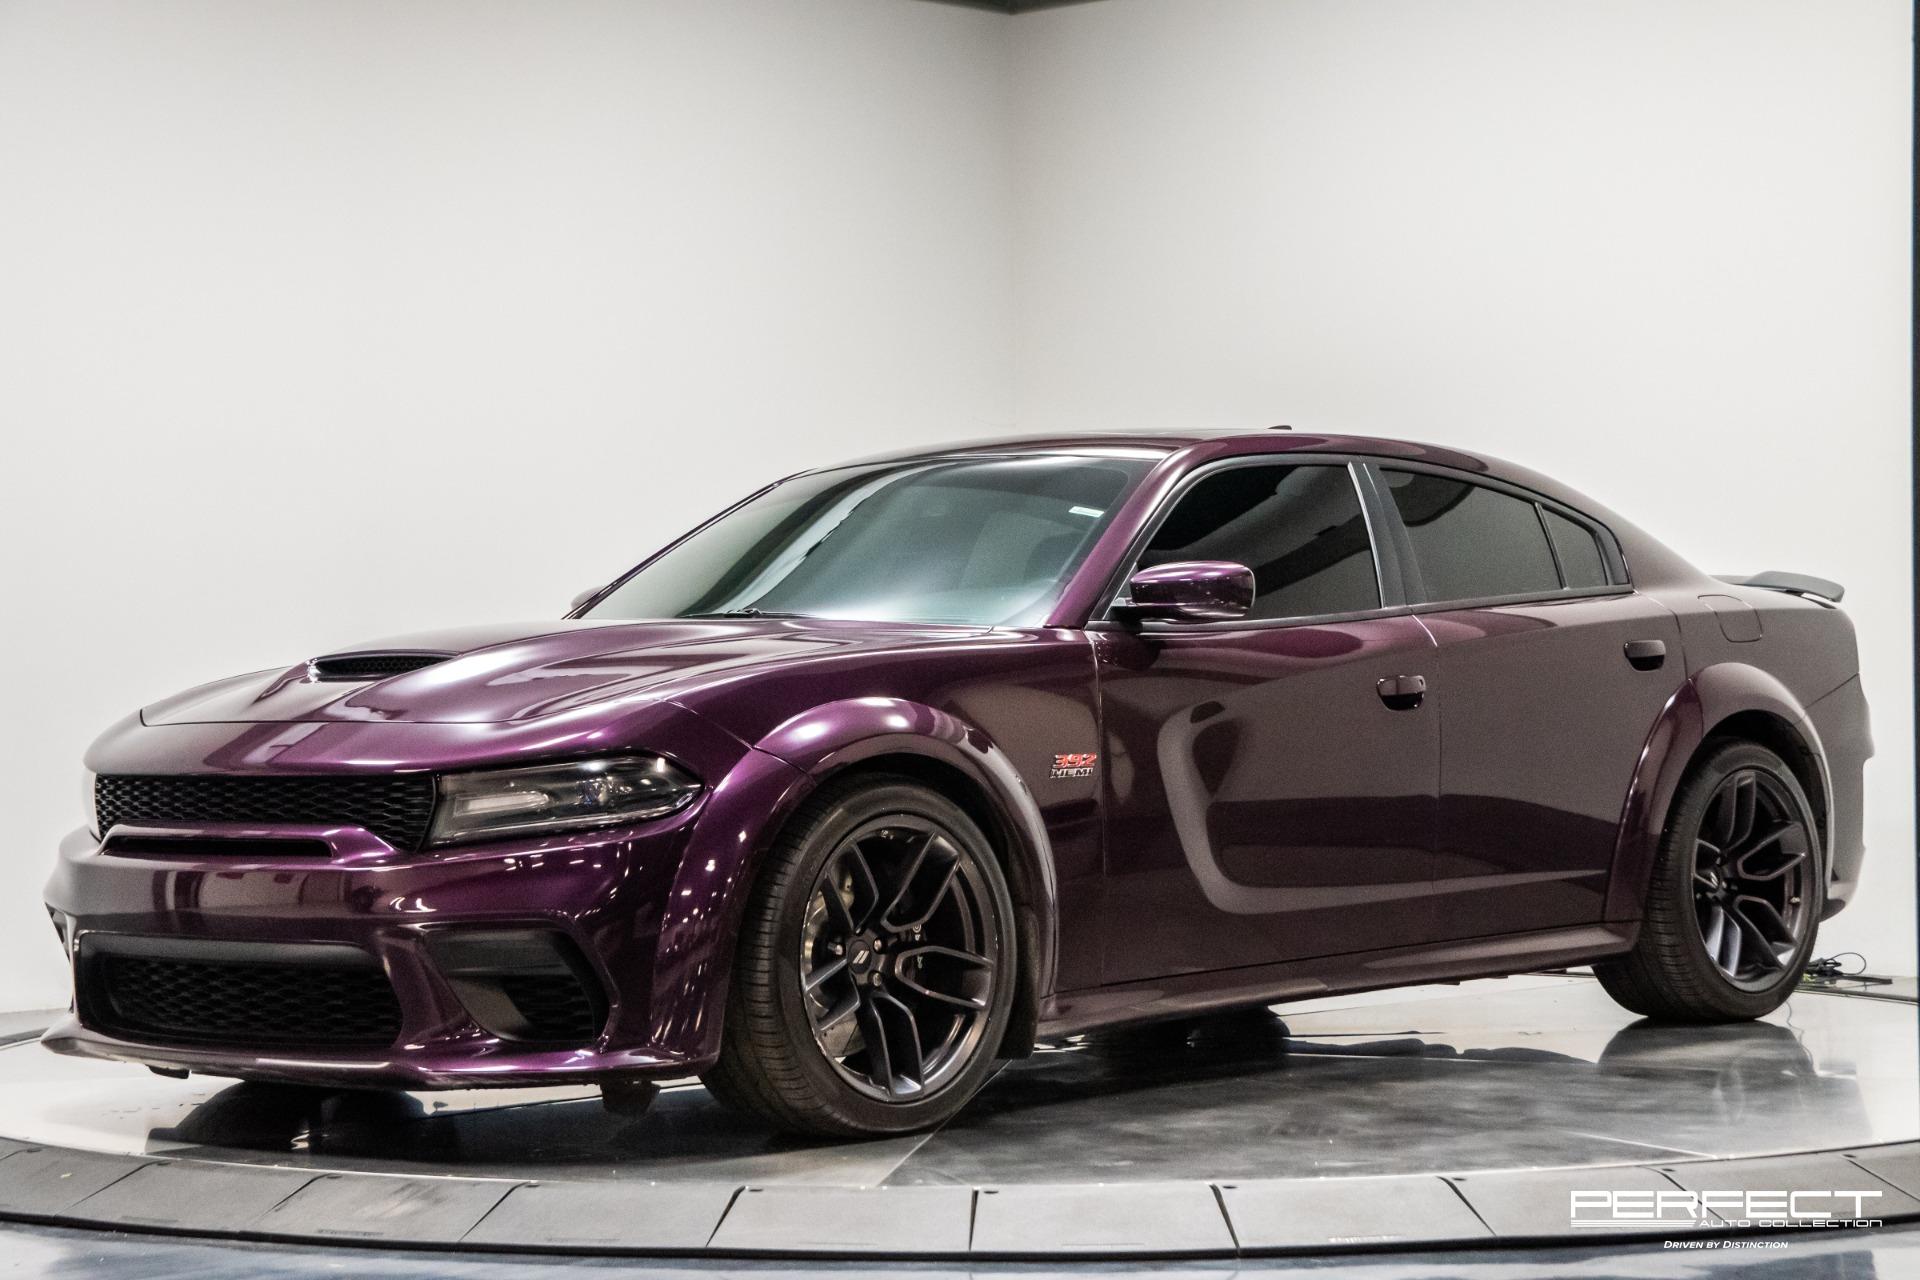 Used 2020 Dodge Charger Scat Pack Widebody For Sale 46 995 Perfect 